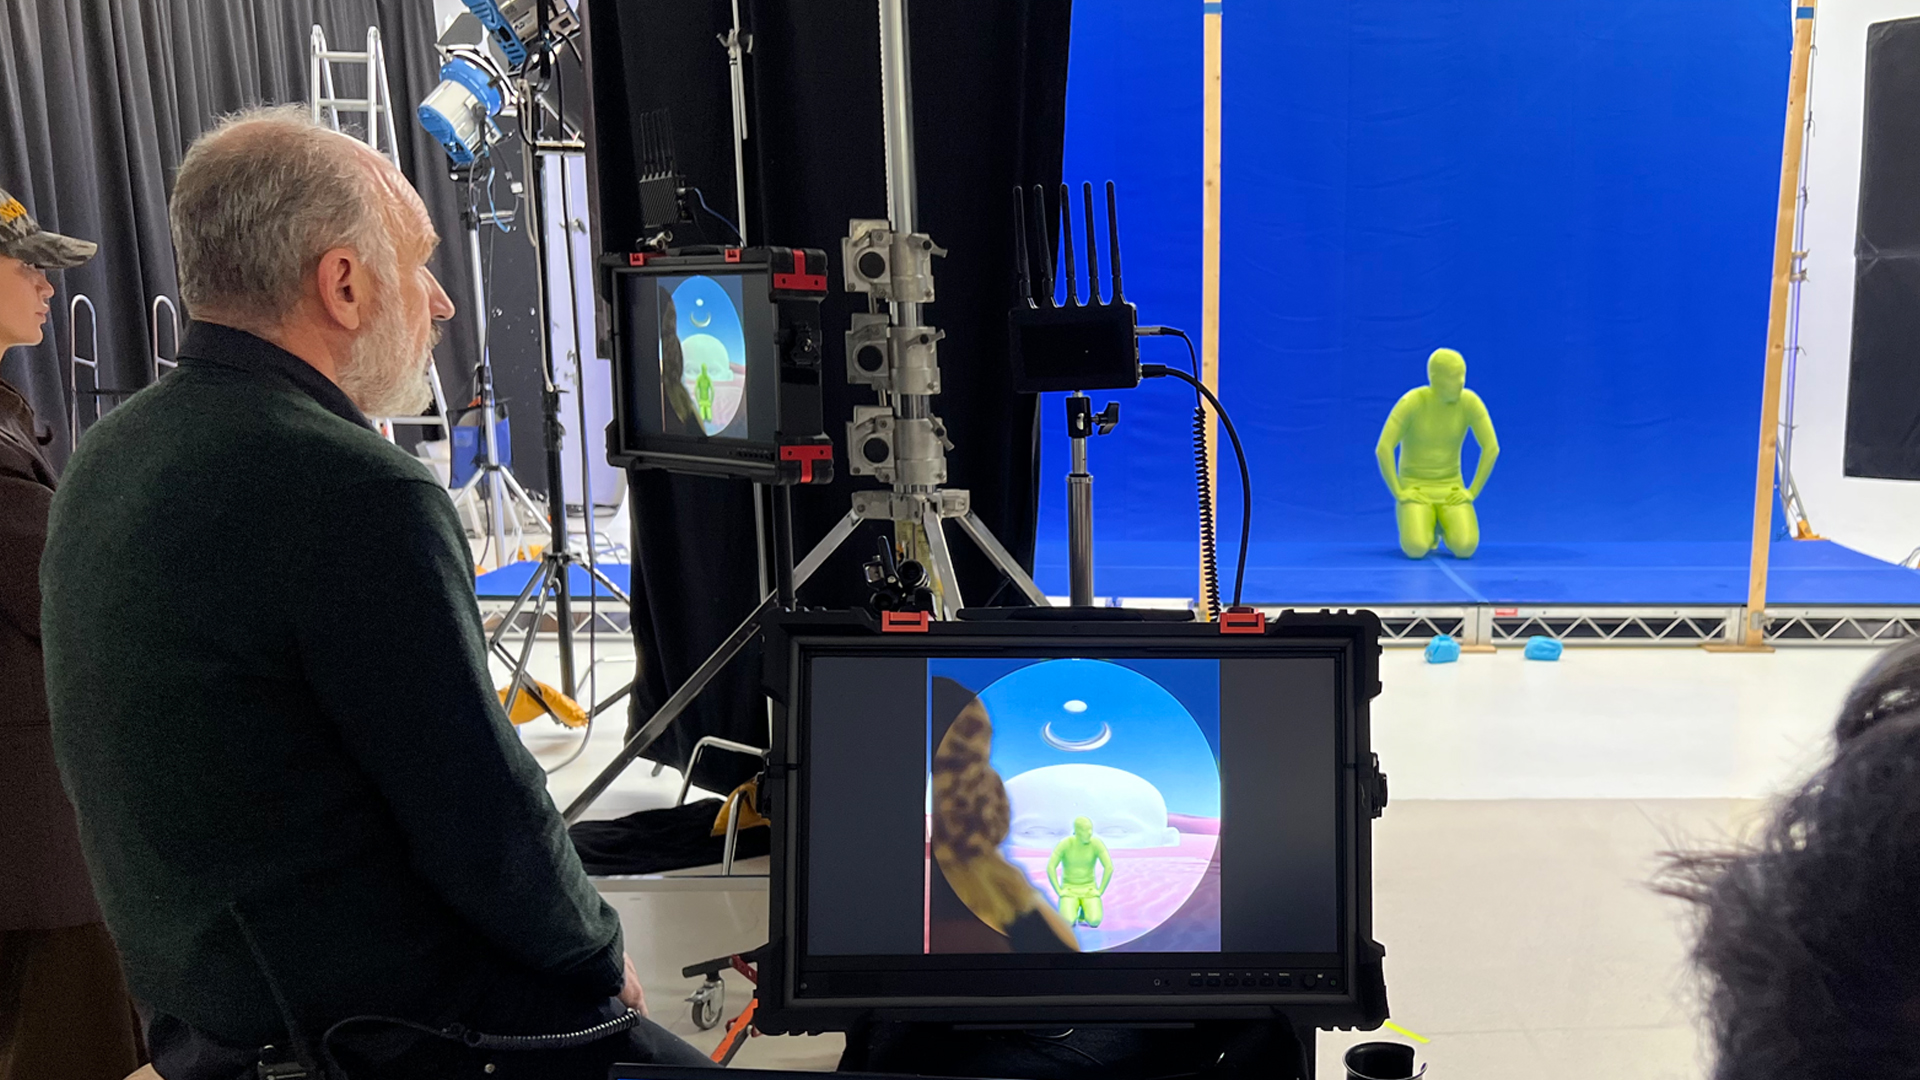 Person in green screen body suit in visual effects blue screen studio being filmed.